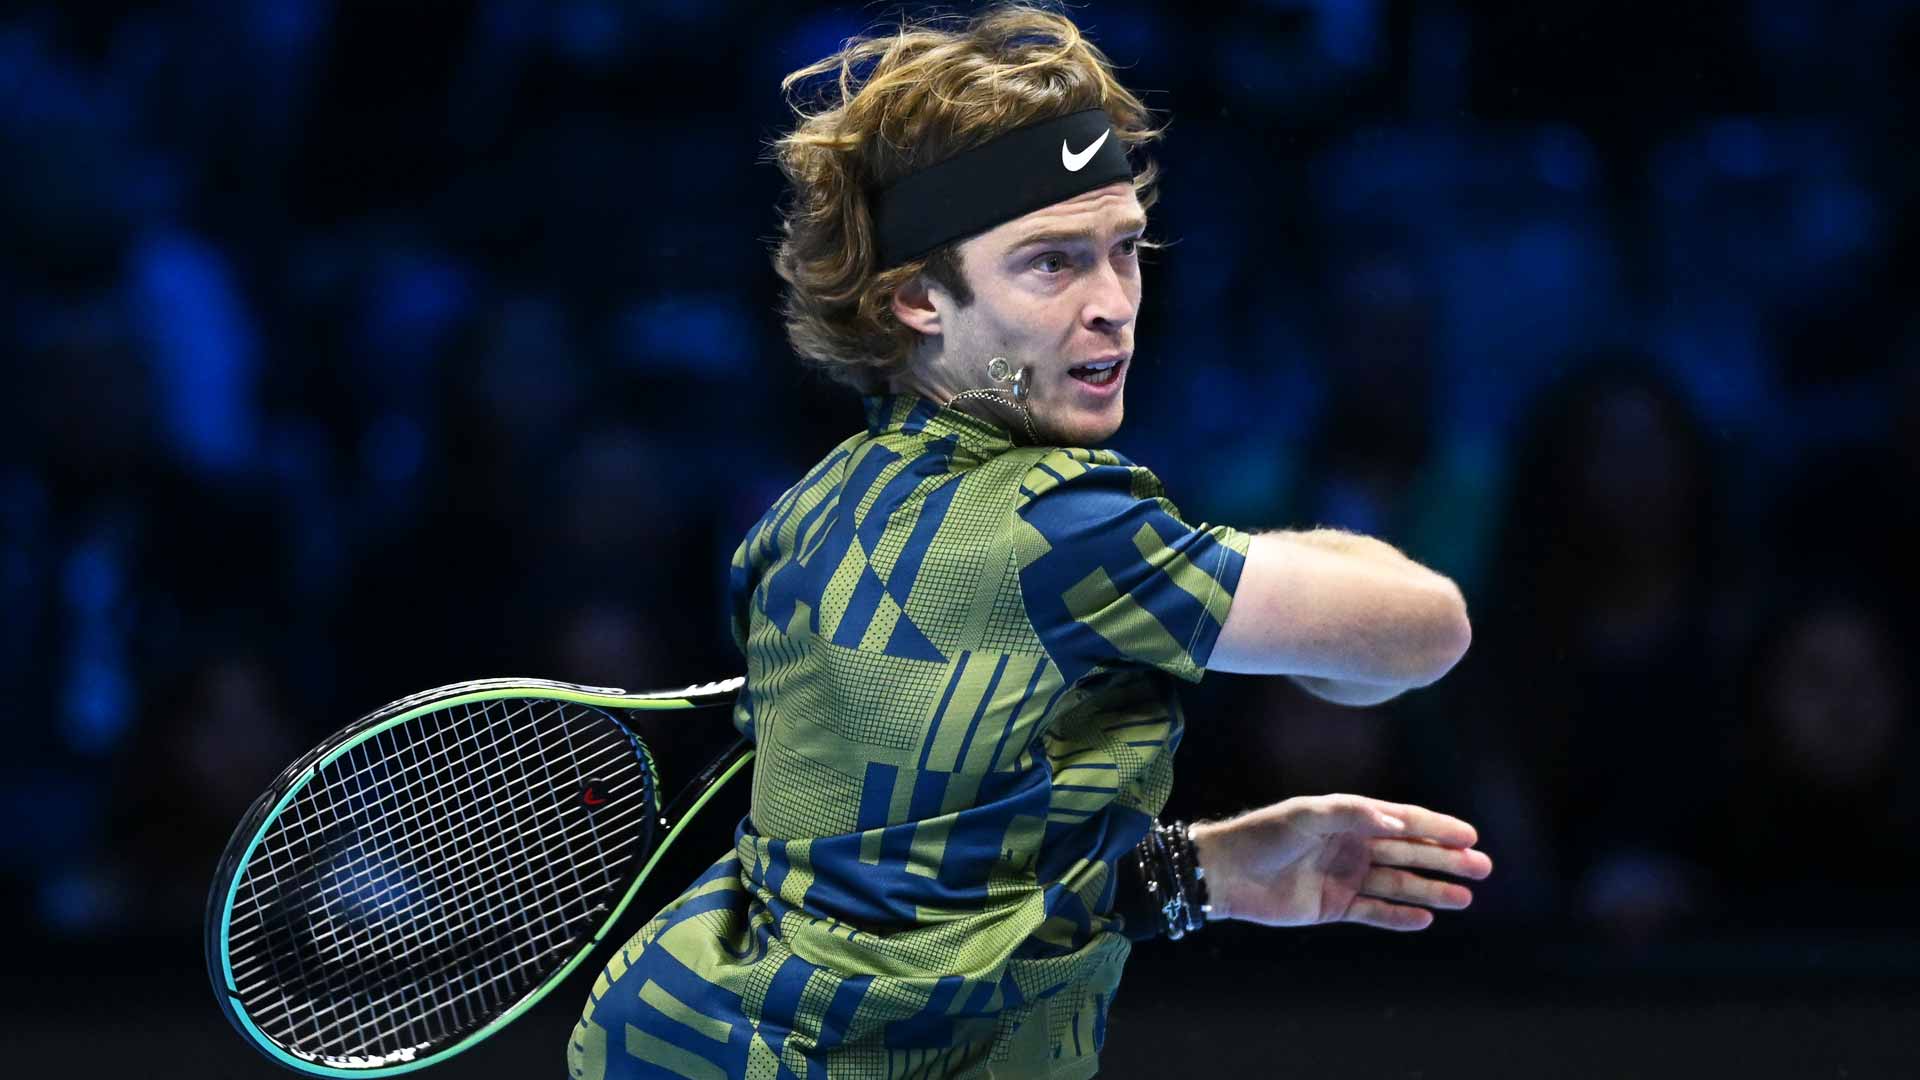 ATP Tour Finals Highlights Andrey Rublev defeats Stefanos Tsitsipas in three sets, ready to take Casper Ruud for place in FINALS Watch HIGHLIGHTS